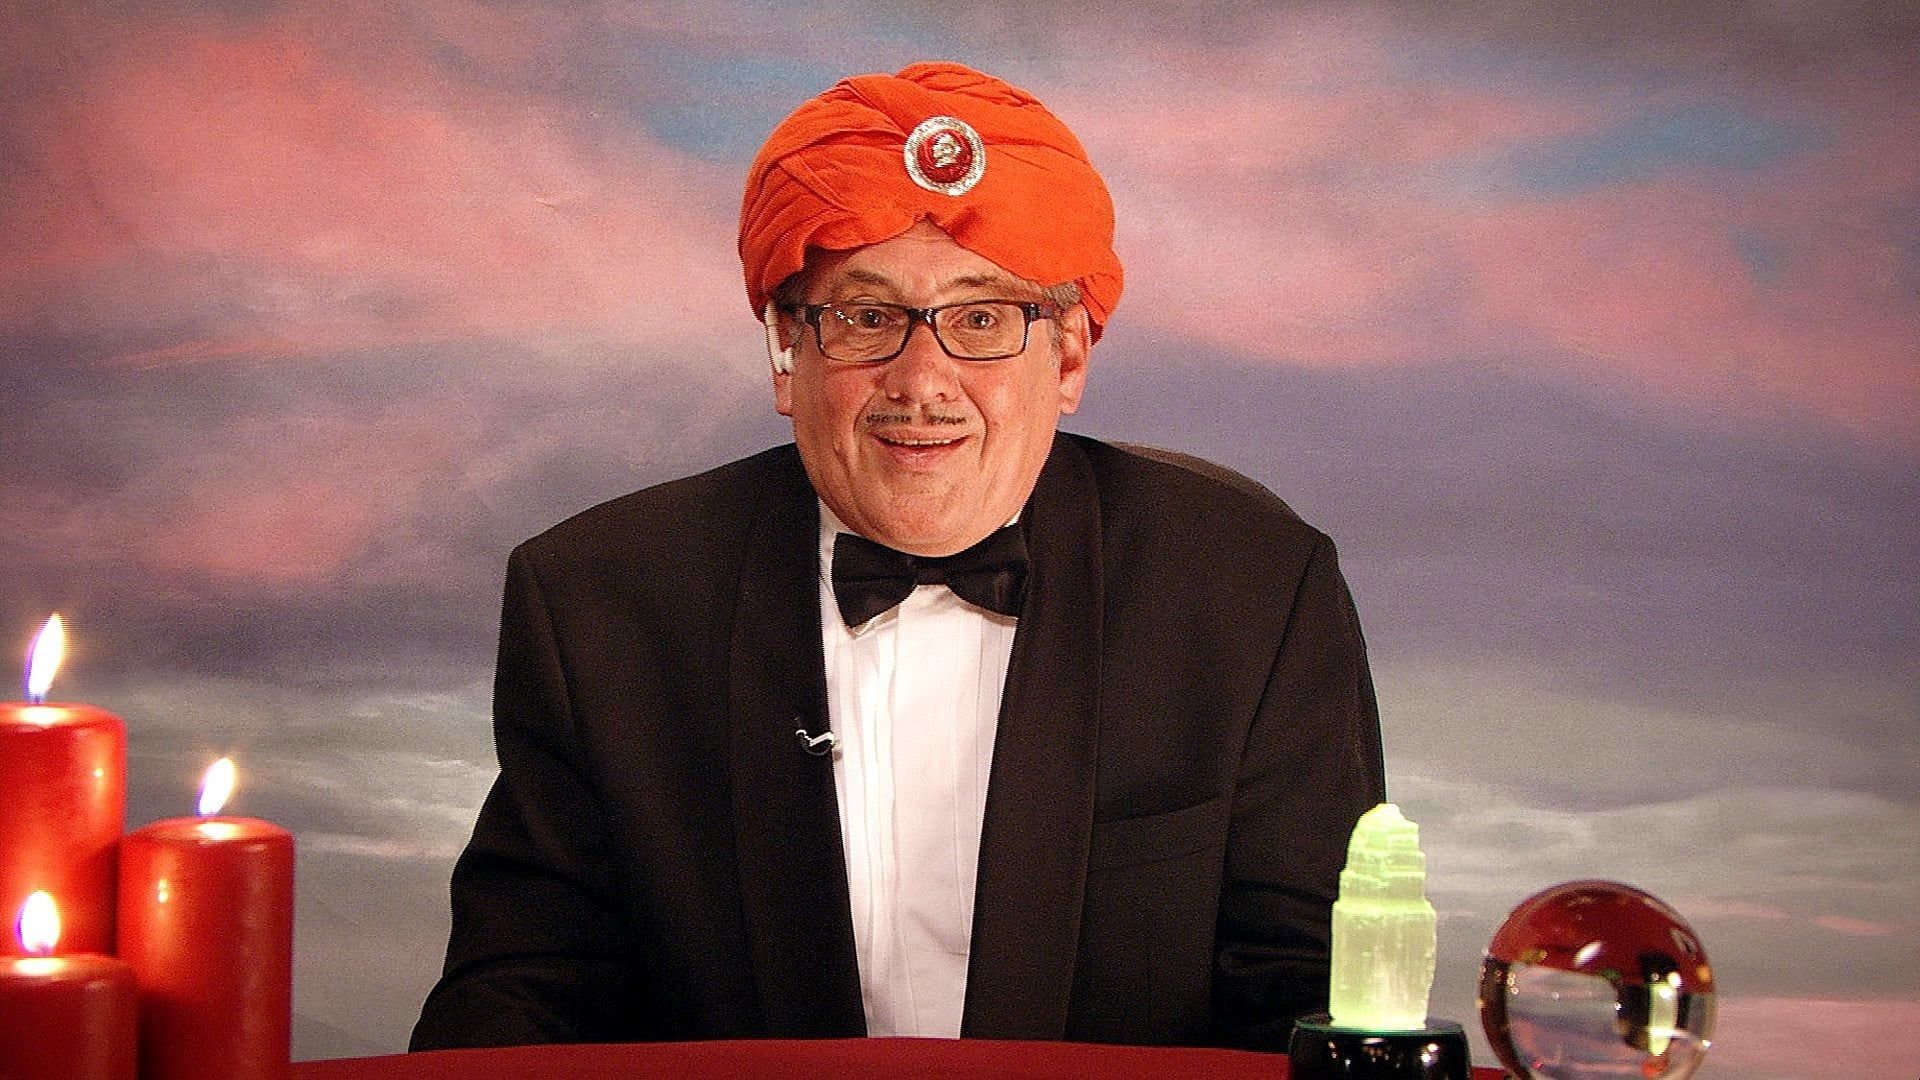 Count Arthur Strong background